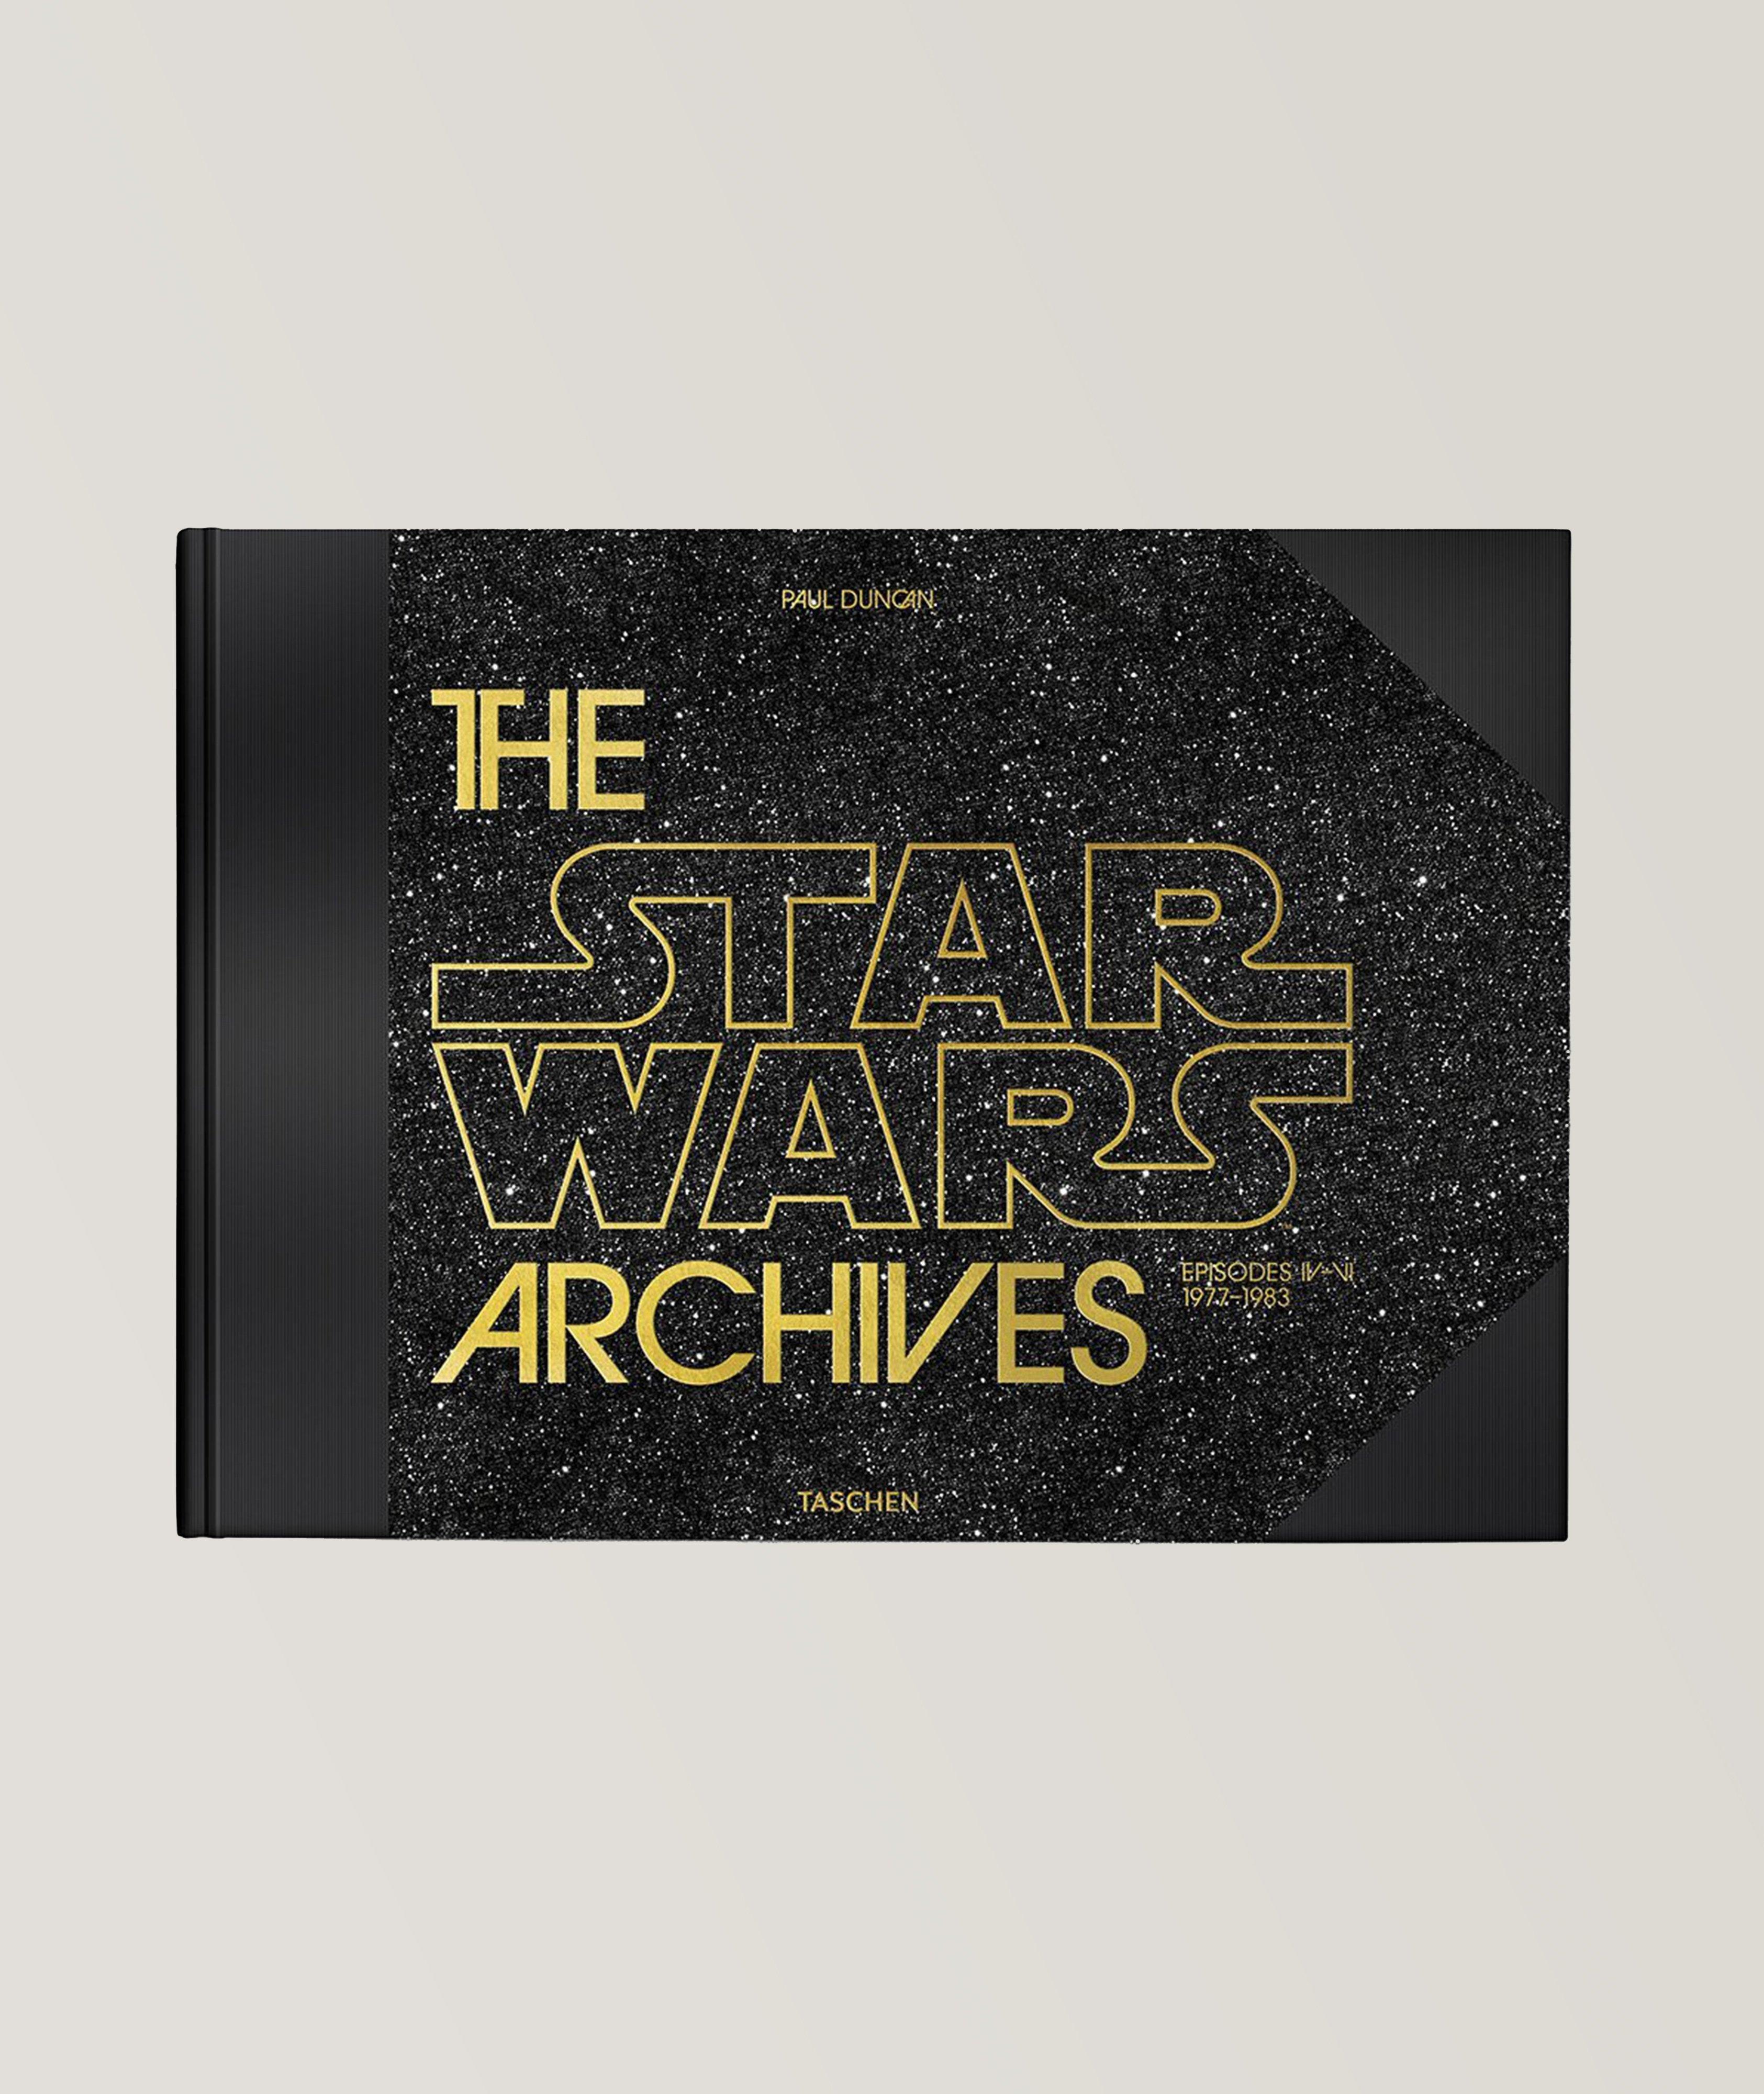 The Star Wars Archives. 1977–1983 Vol.1